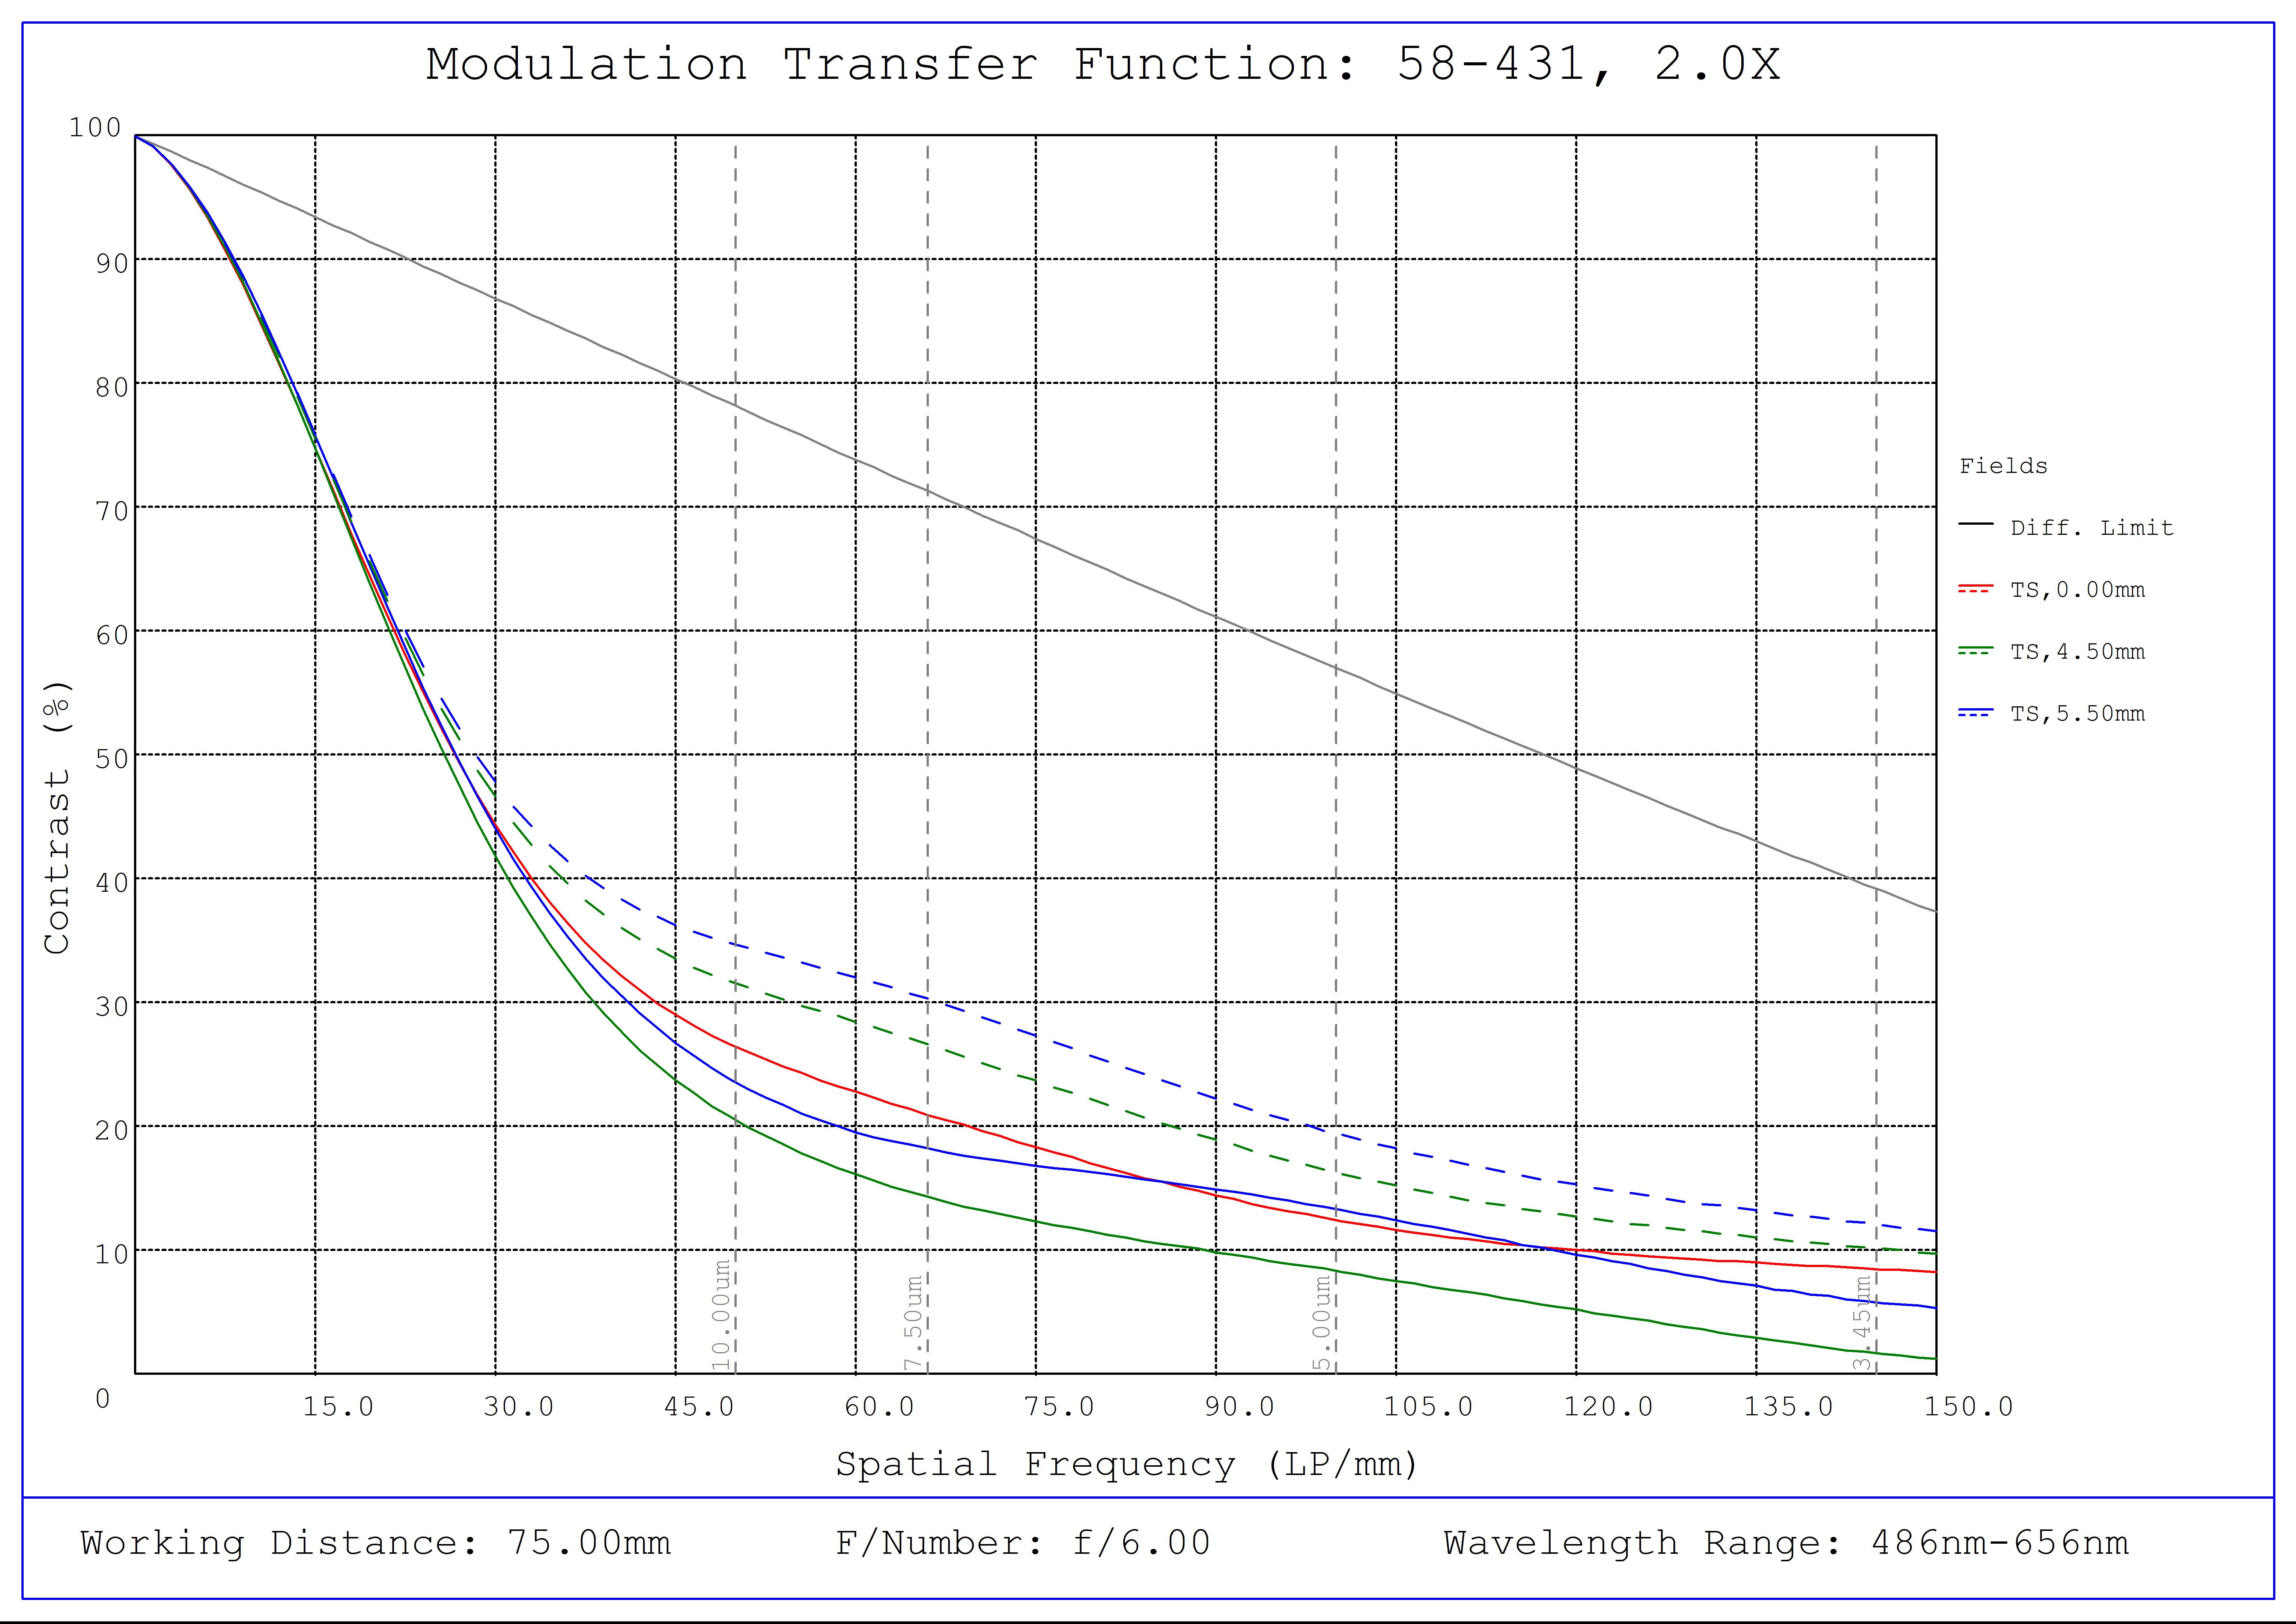 #58-431, 2.0X SilverTL™ Telecentric Lens, Modulated Transfer Function (MTF) Plot, 75mm Working Distance, f6